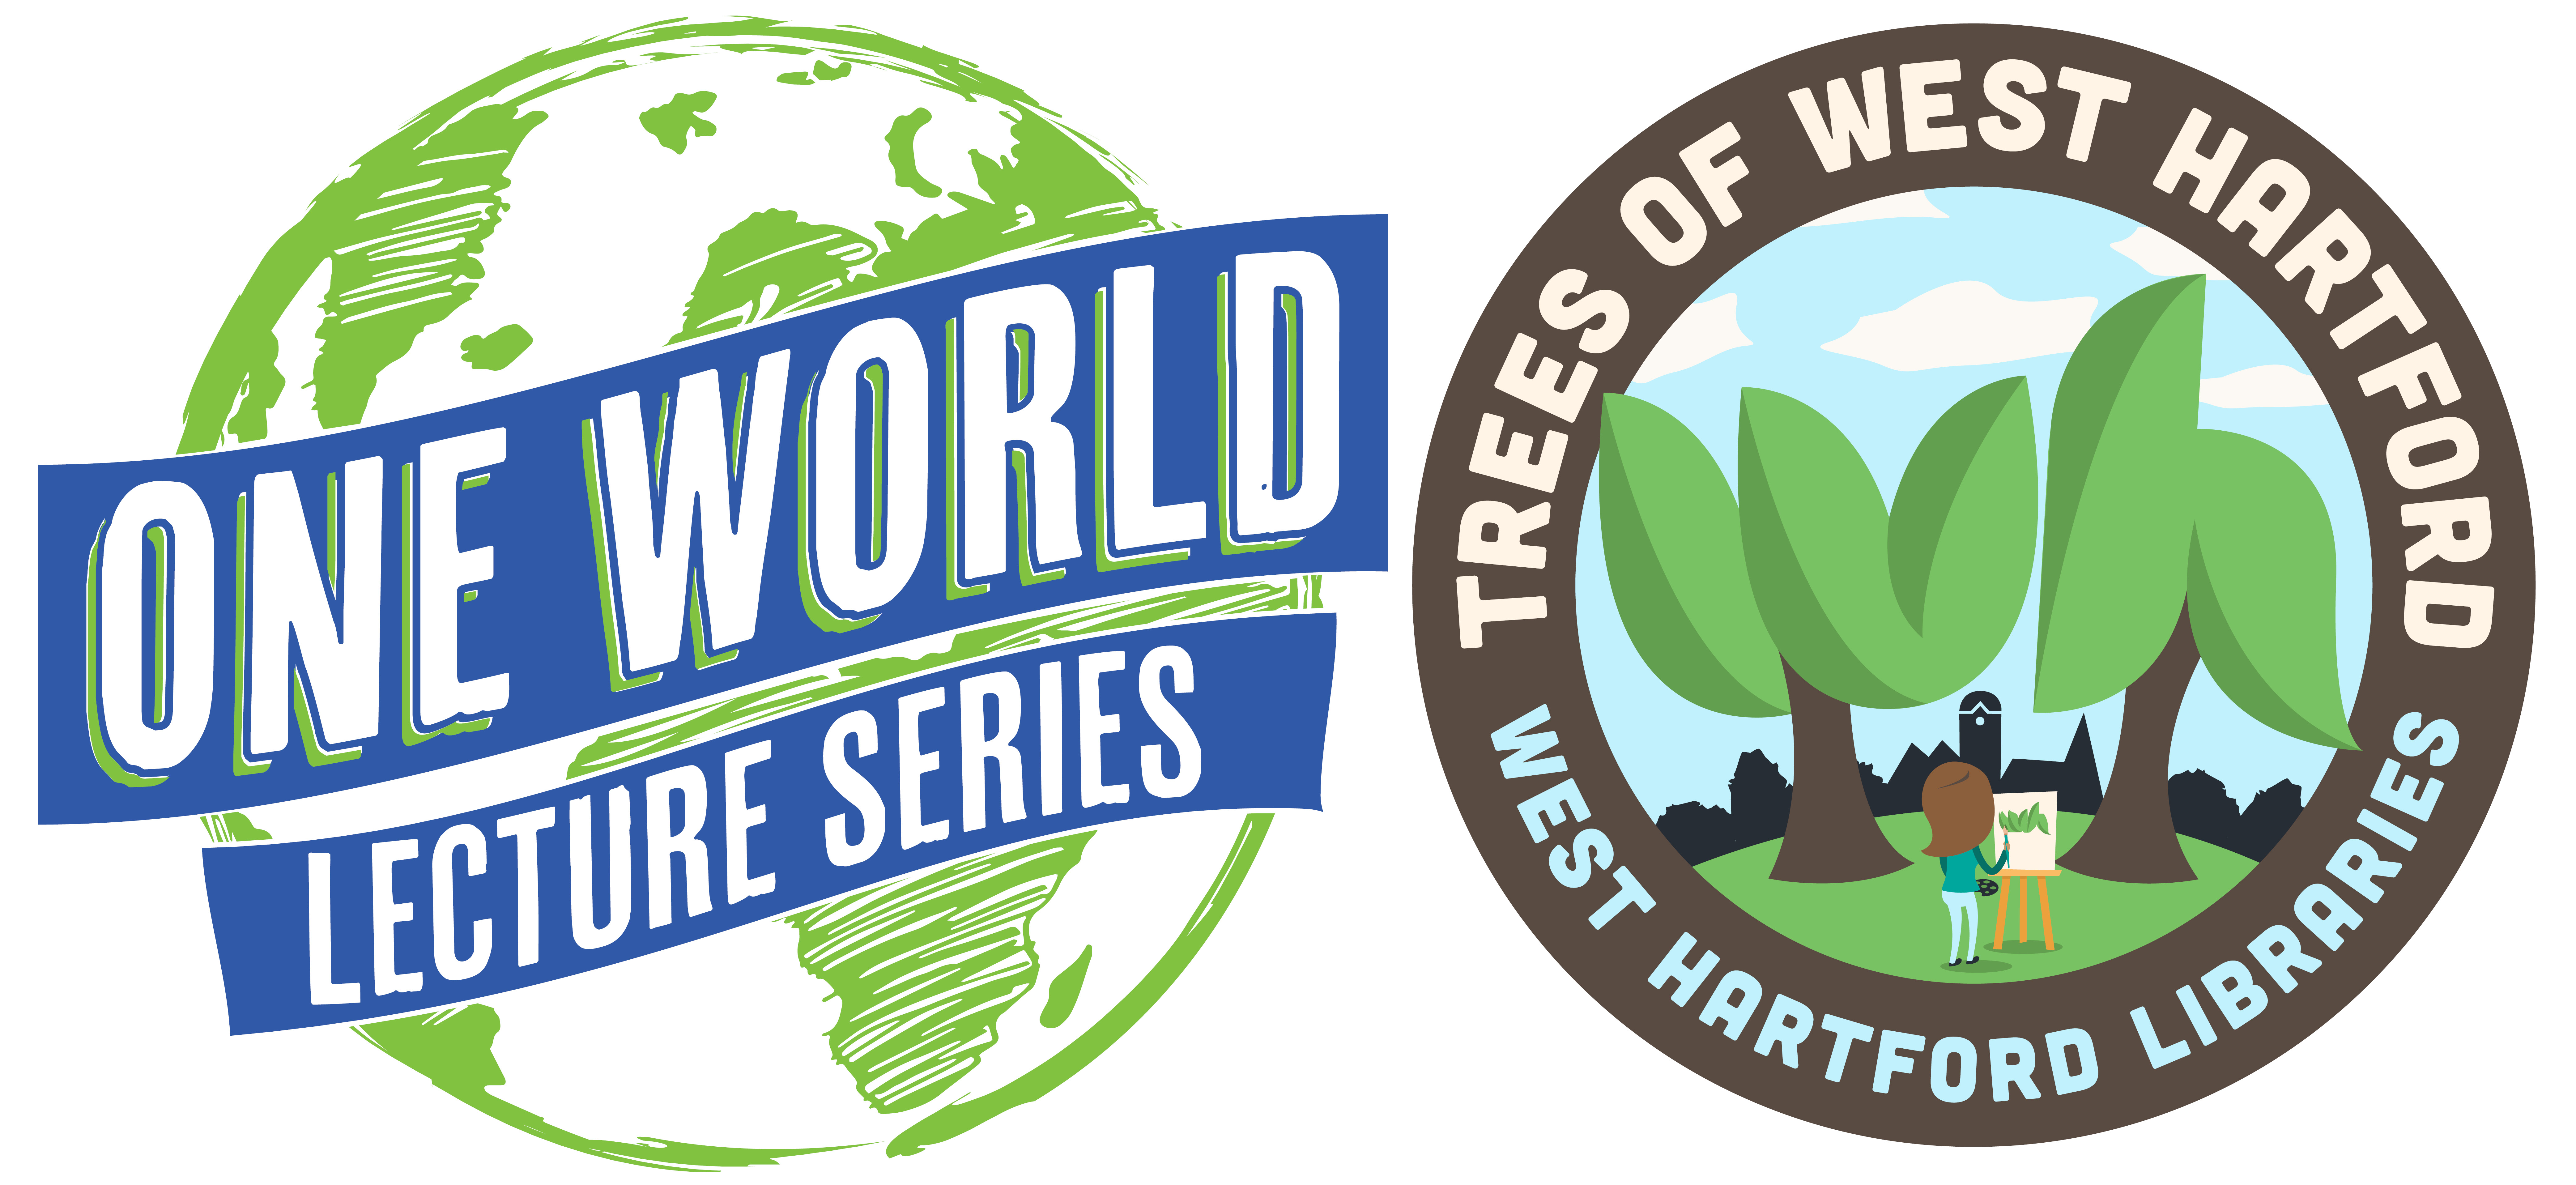 One World Lecture / Trees of West Hartford